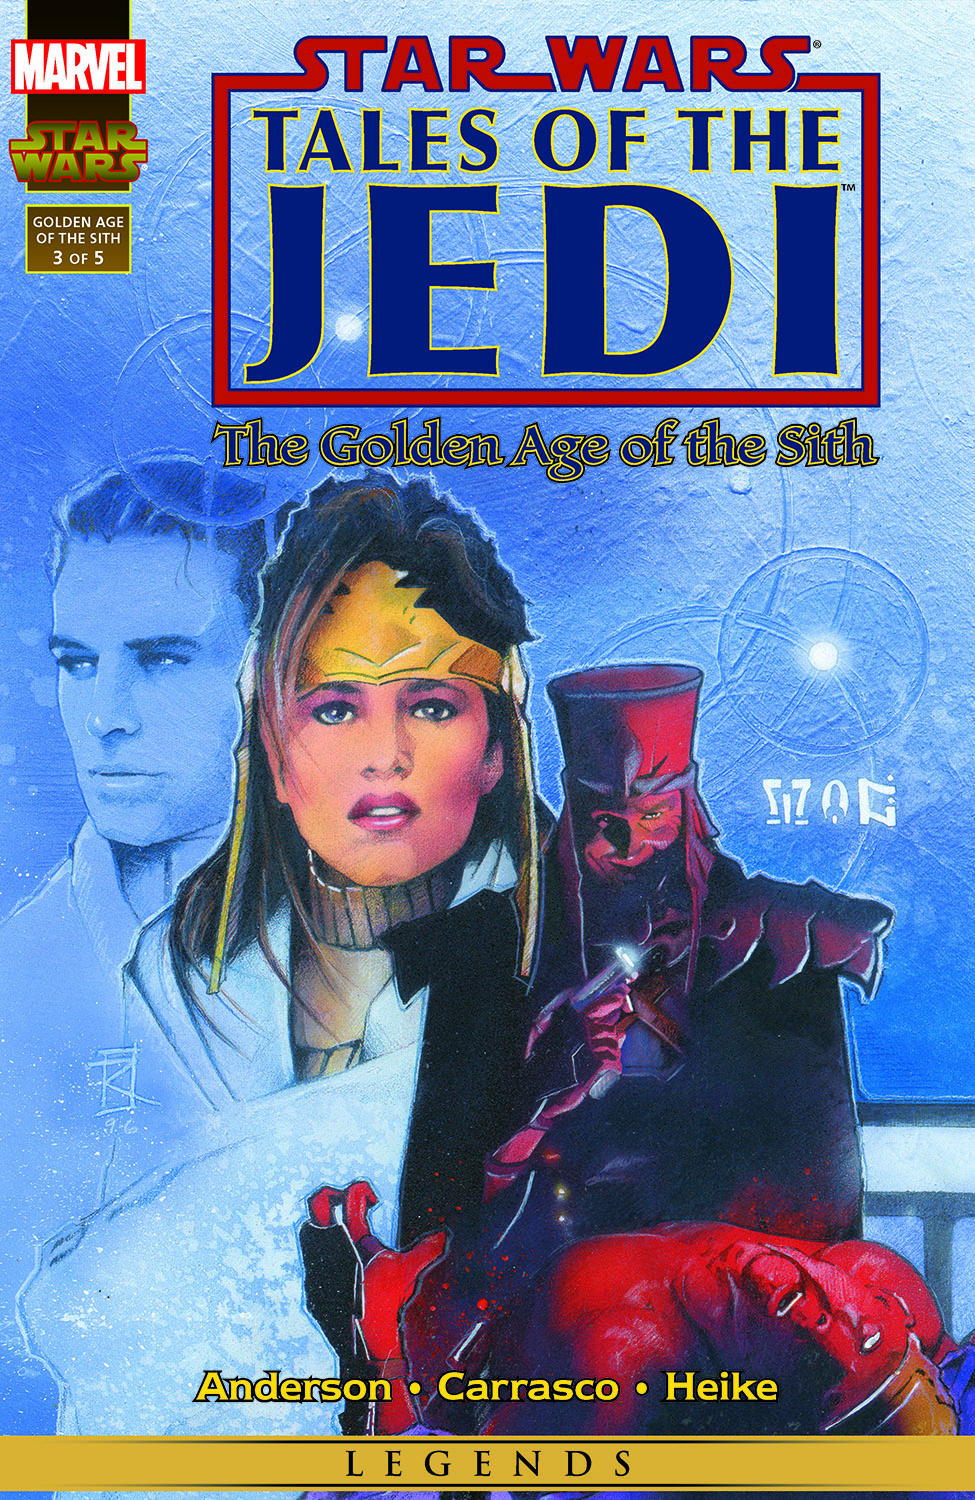 Star Wars: Tales of the Jedi - The Golden Age of the Sith (1996) #3